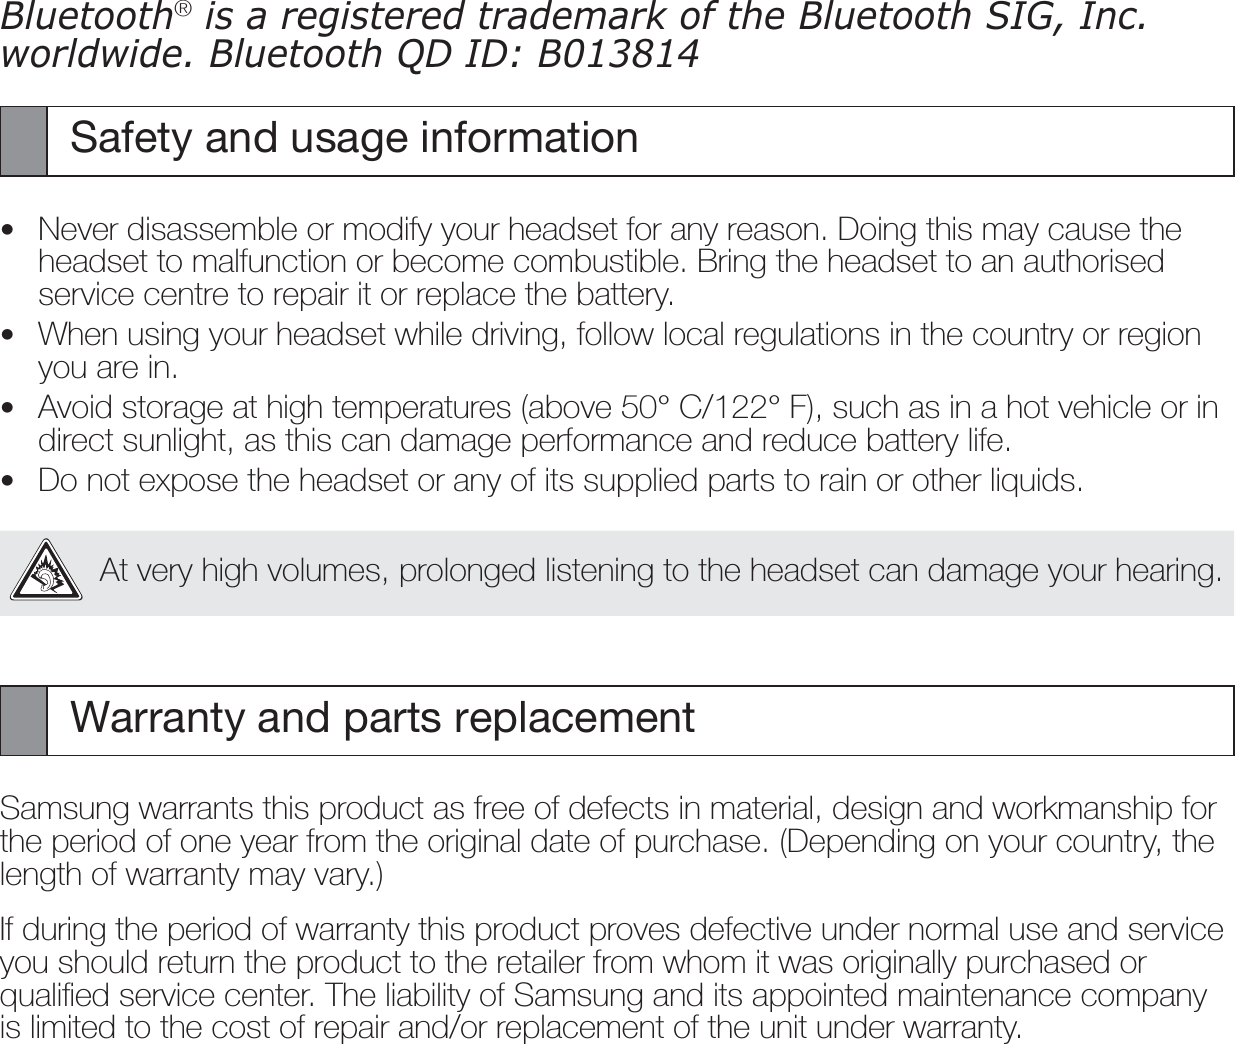 EnglishBluetooth® is a registered trademark of the Bluetooth SIG, Inc. worldwide. Bluetooth QD ID: B013814Safety and usage informationNever disassemble or modify your headset for any reason. Doing this may cause the headset to malfunction or become combustible. Bring the headset to an authorised service centre to repair it or replace the battery.When using your headset while driving, follow local regulations in the country or region you are in.Avoid storage at high temperatures (above 50° C/122° F), such as in a hot vehicle or in direct sunlight, as this can damage performance and reduce battery life.Do not expose the headset or any of its supplied parts to rain or other liquids.At very high volumes, prolonged listening to the headset can damage your hearing.Warranty and parts replacementSamsung warrants this product as free of defects in material, design and workmanship for the period of one year from the original date of purchase. (Depending on your country, the length of warranty may vary.)If during the period of warranty this product proves defective under normal use and service you should return the product to the retailer from whom it was originally purchased or qualiﬁed service center. The liability of Samsung and its appointed maintenance company is limited to the cost of repair and/or replacement of the unit under warranty.••••